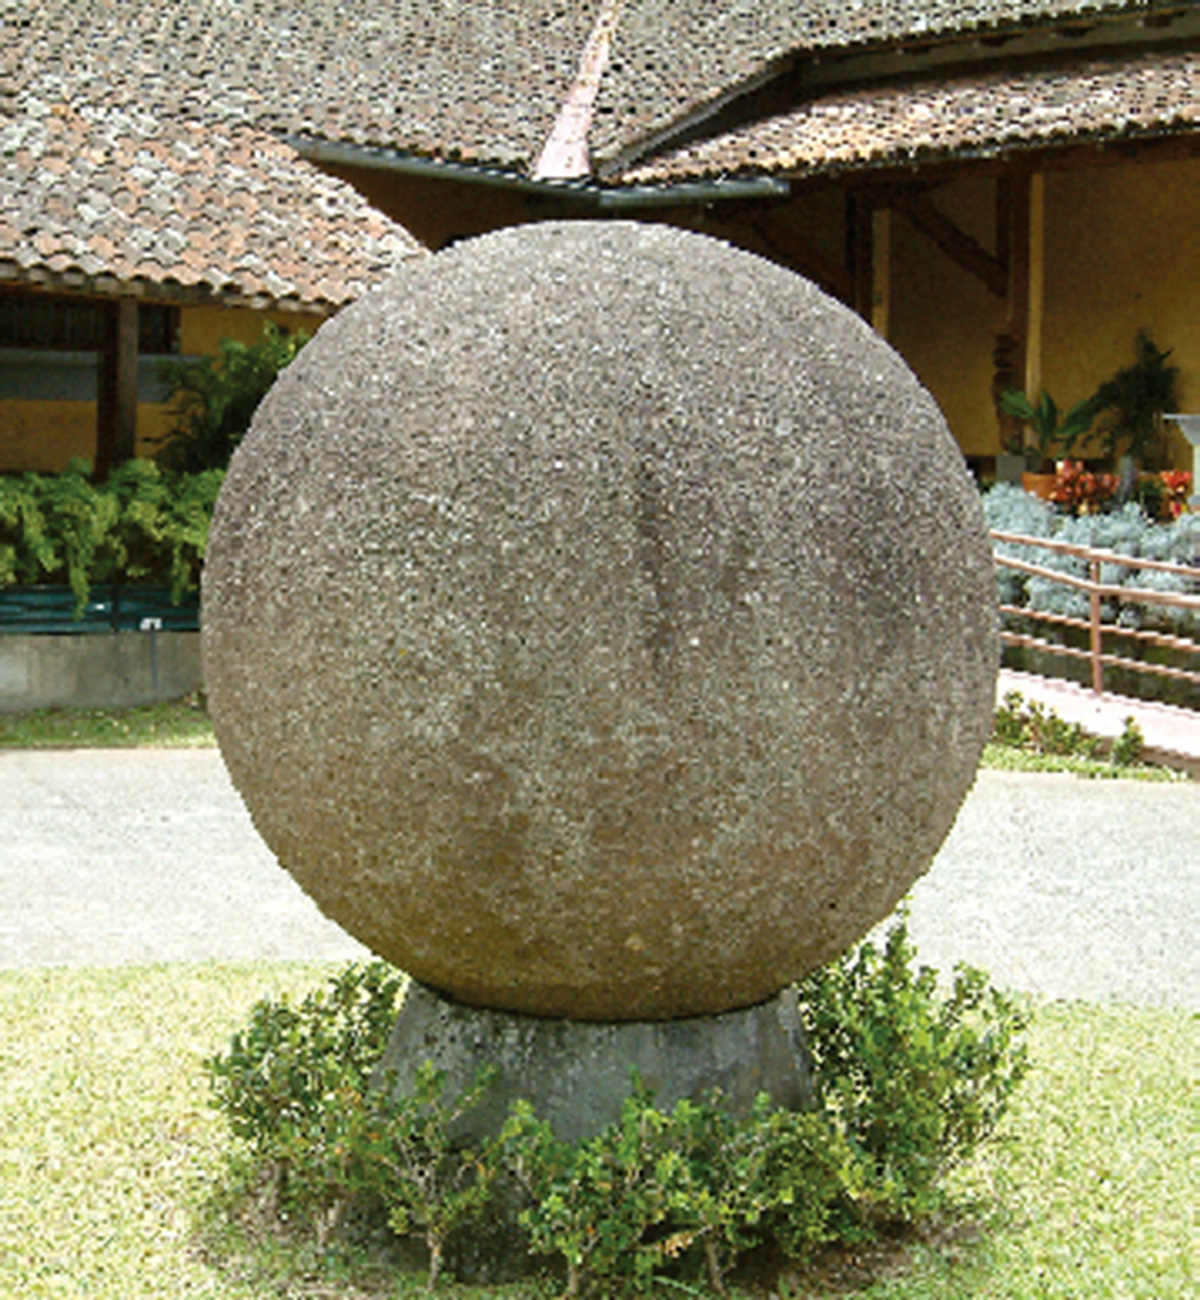 A photograph of a round stone sphere unearthed in the Diquis Valley of Costa Rica.